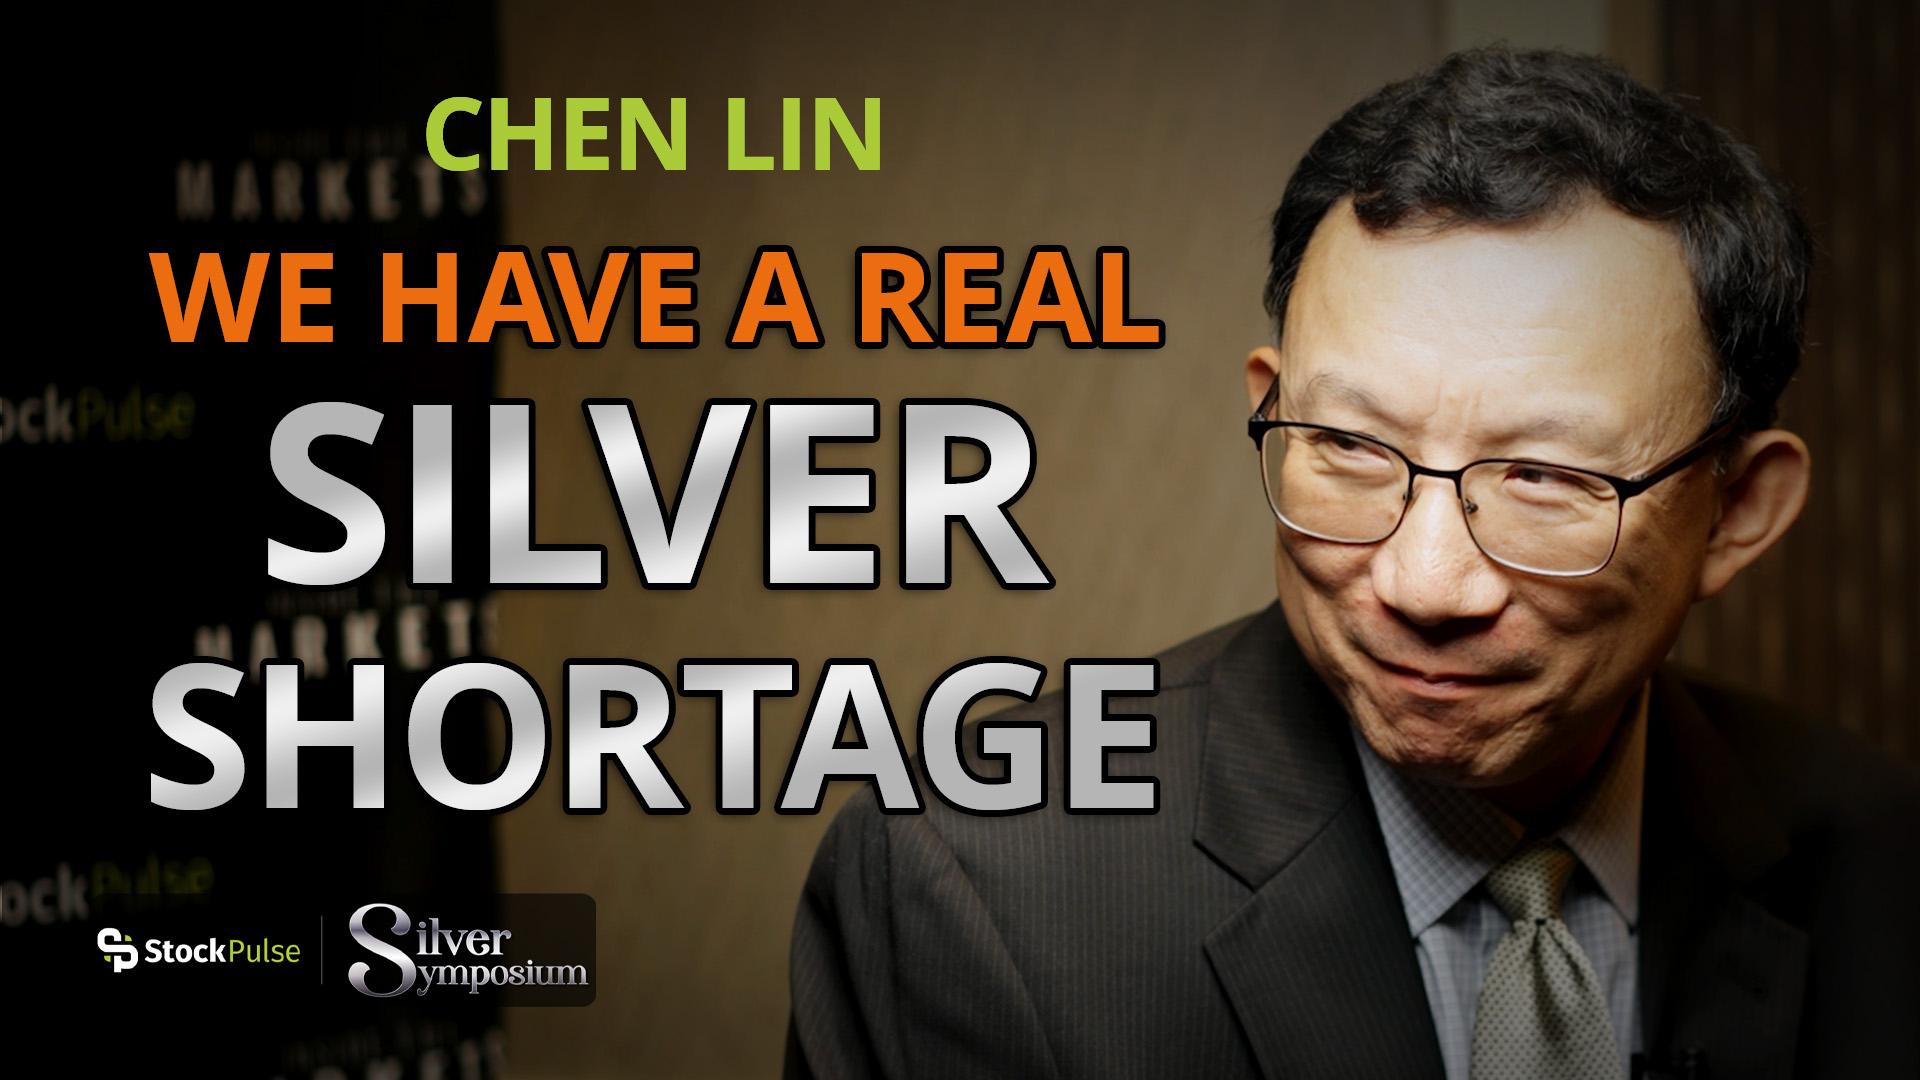 Chen Lin: We Have a Real Silver Shortage